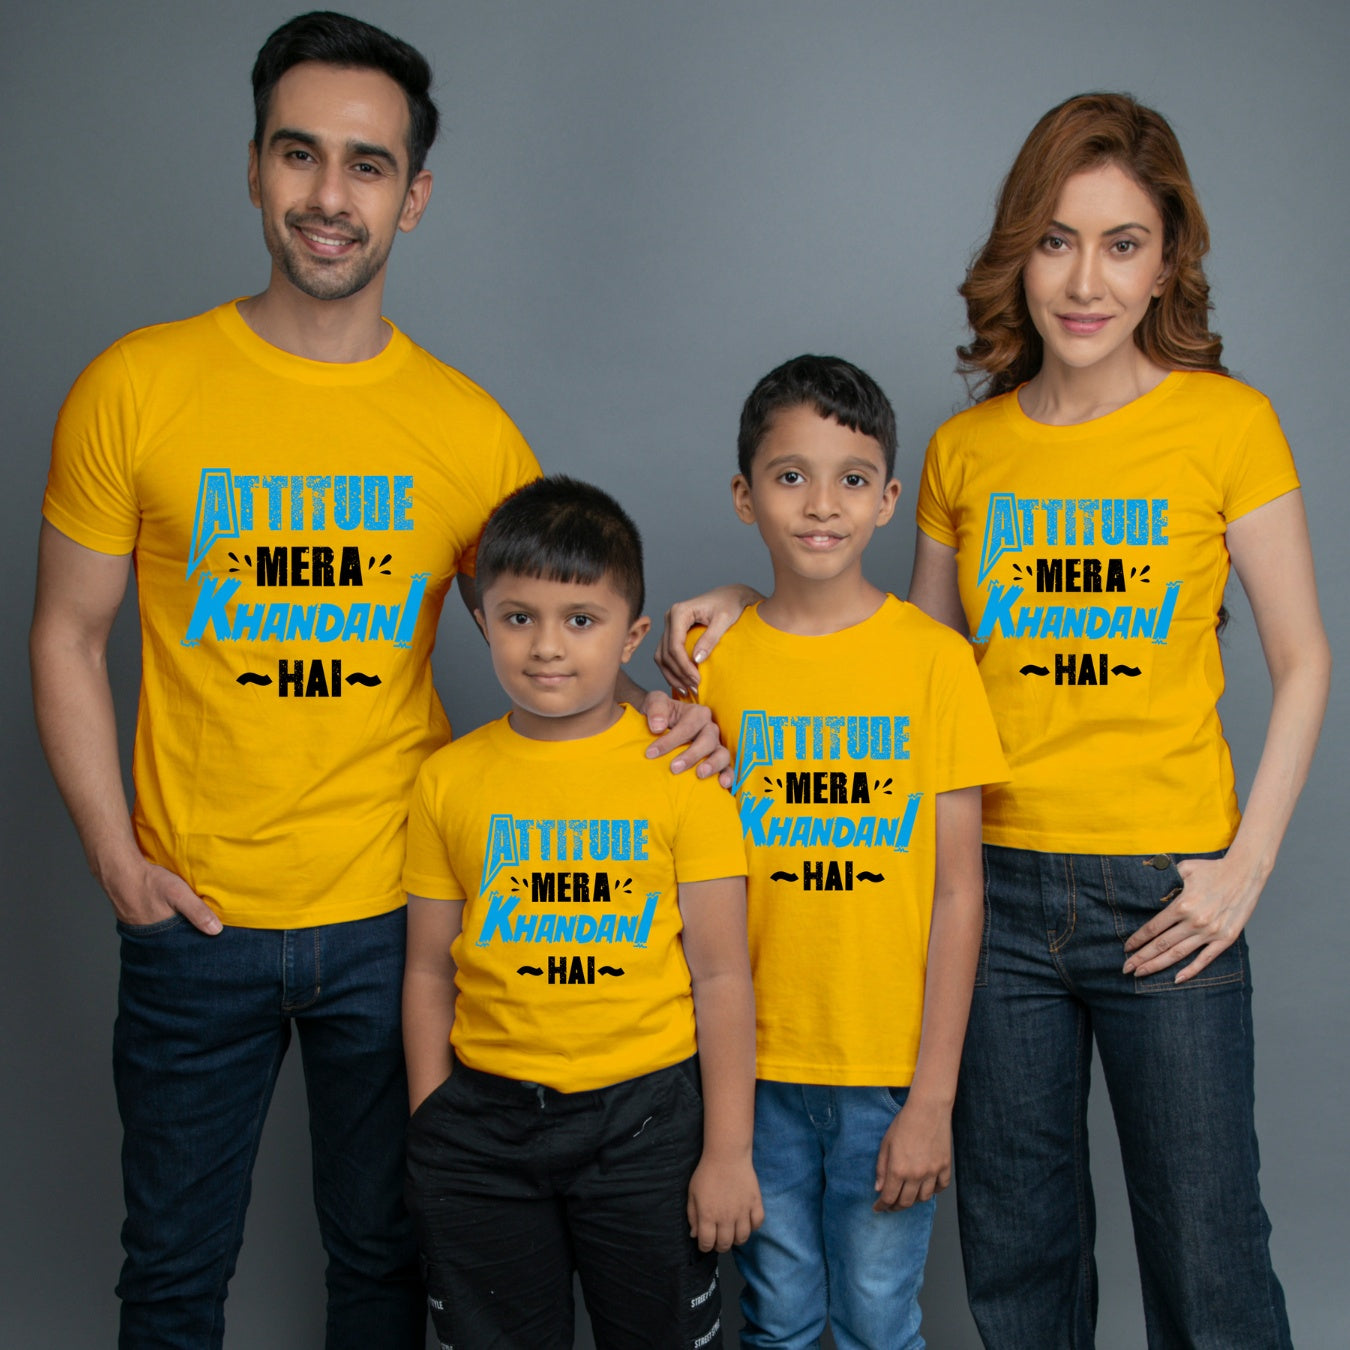 Family t shirts set of 4 Mom Dad Two Sons in Yellow Colour - Attitude Mera Khandani Hain Variant